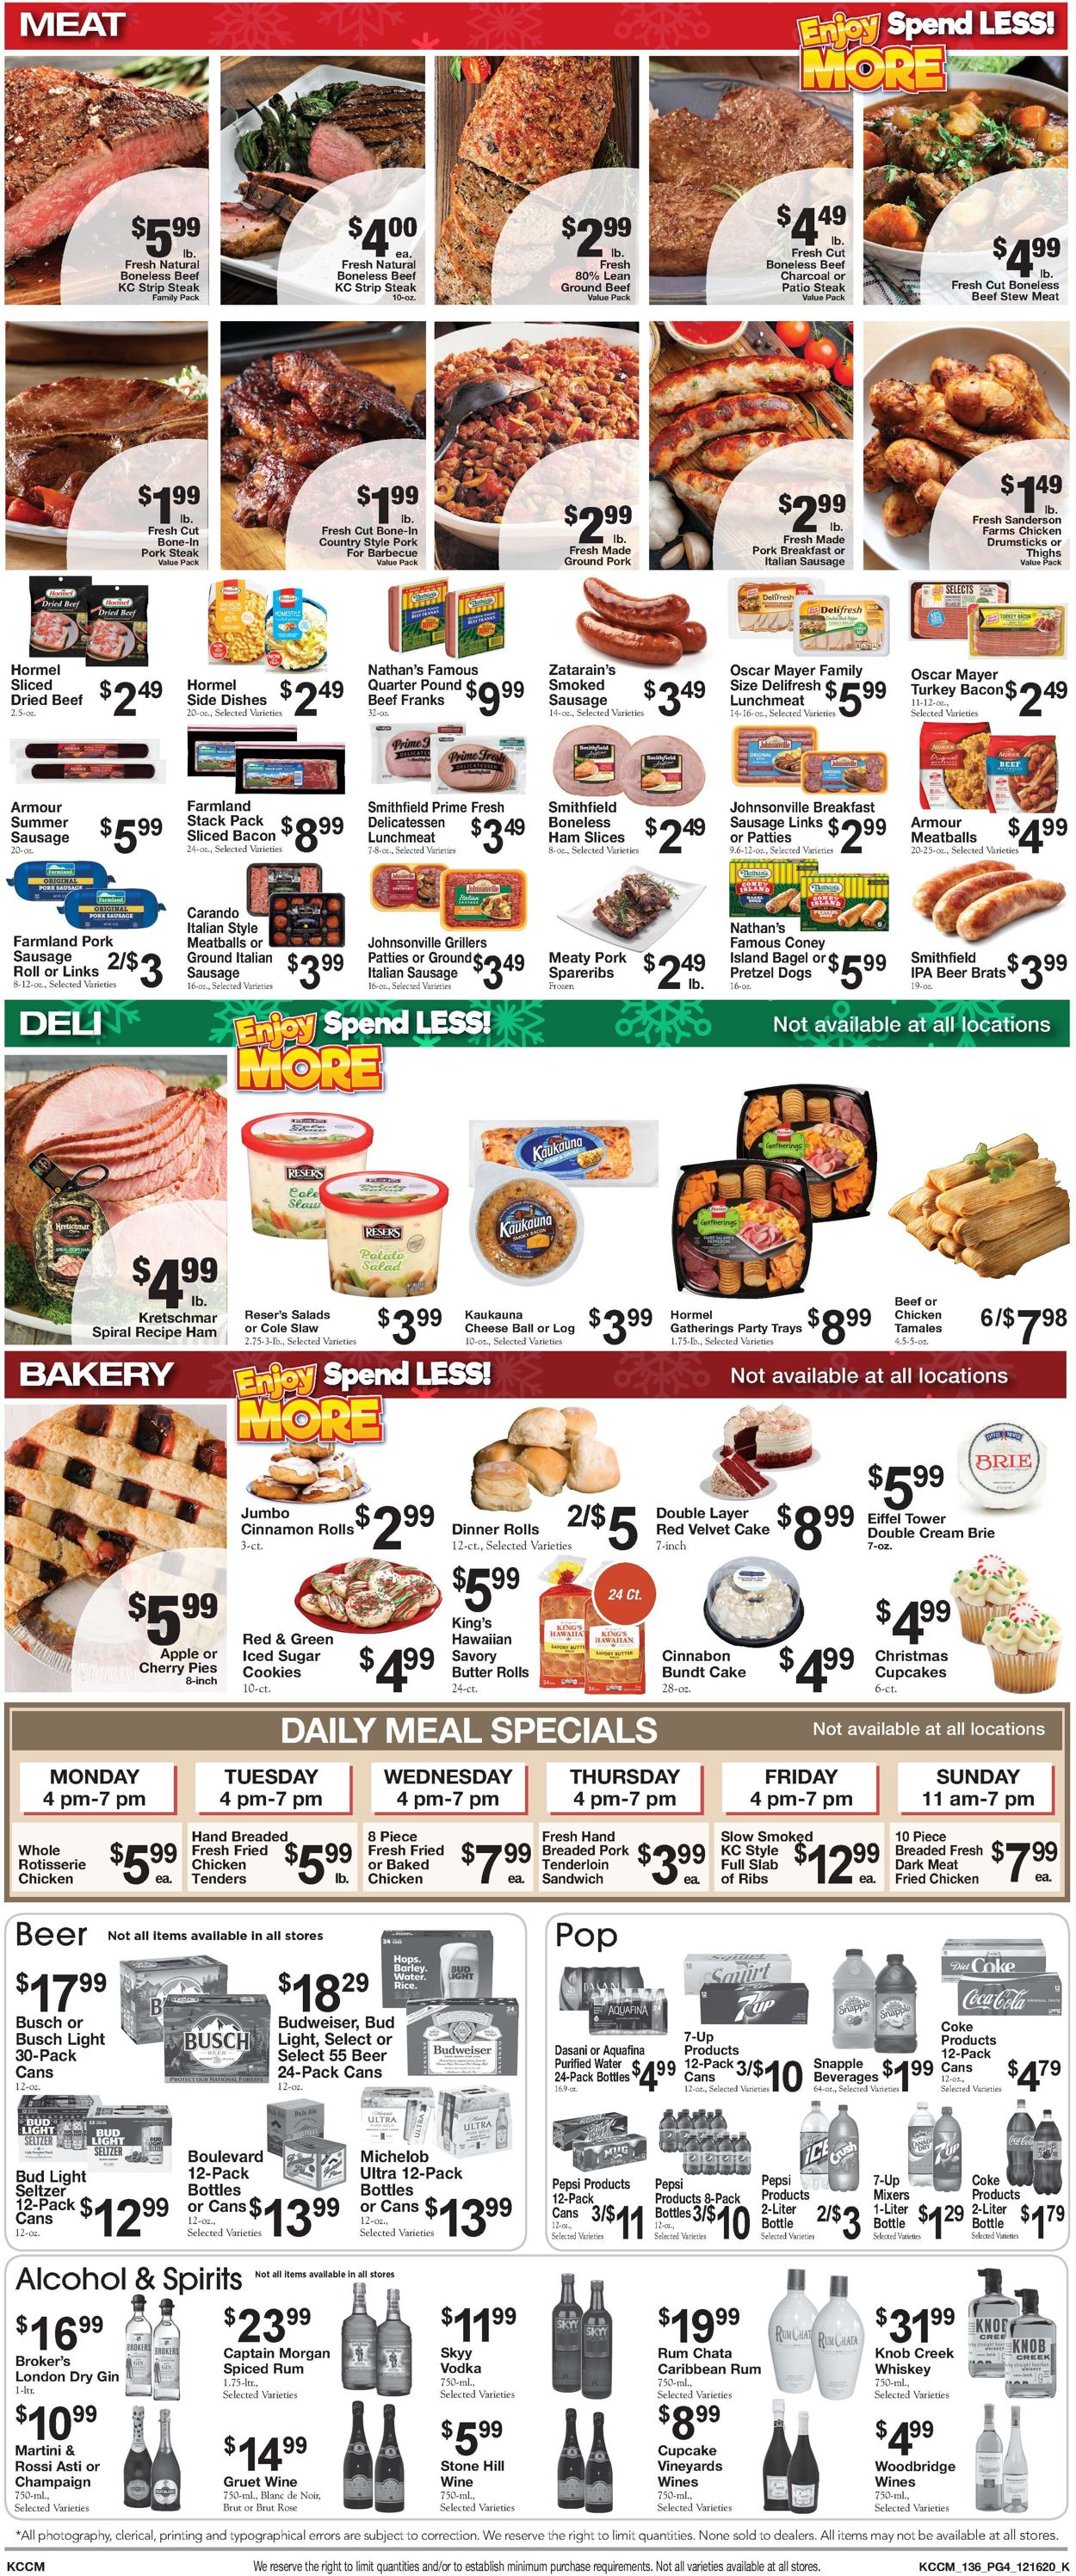 Country Mart Ad from 12/16/2020